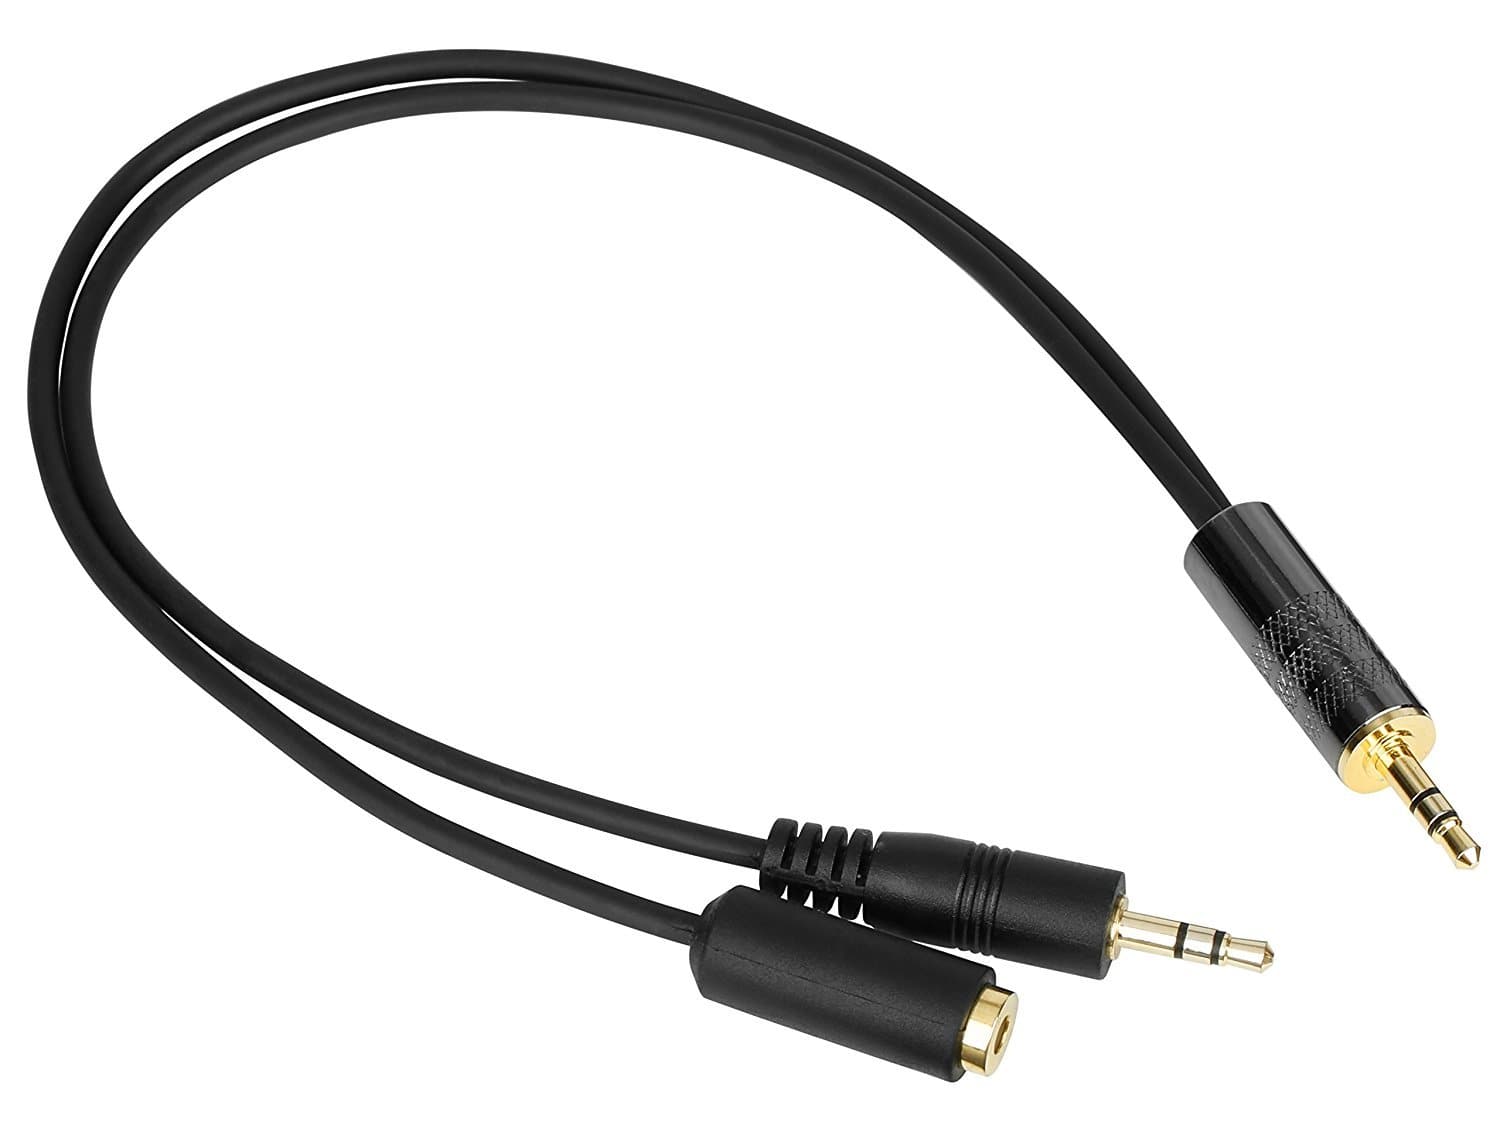 Microphone Cords, Microphone Adapters, Cables, & Audio Wires